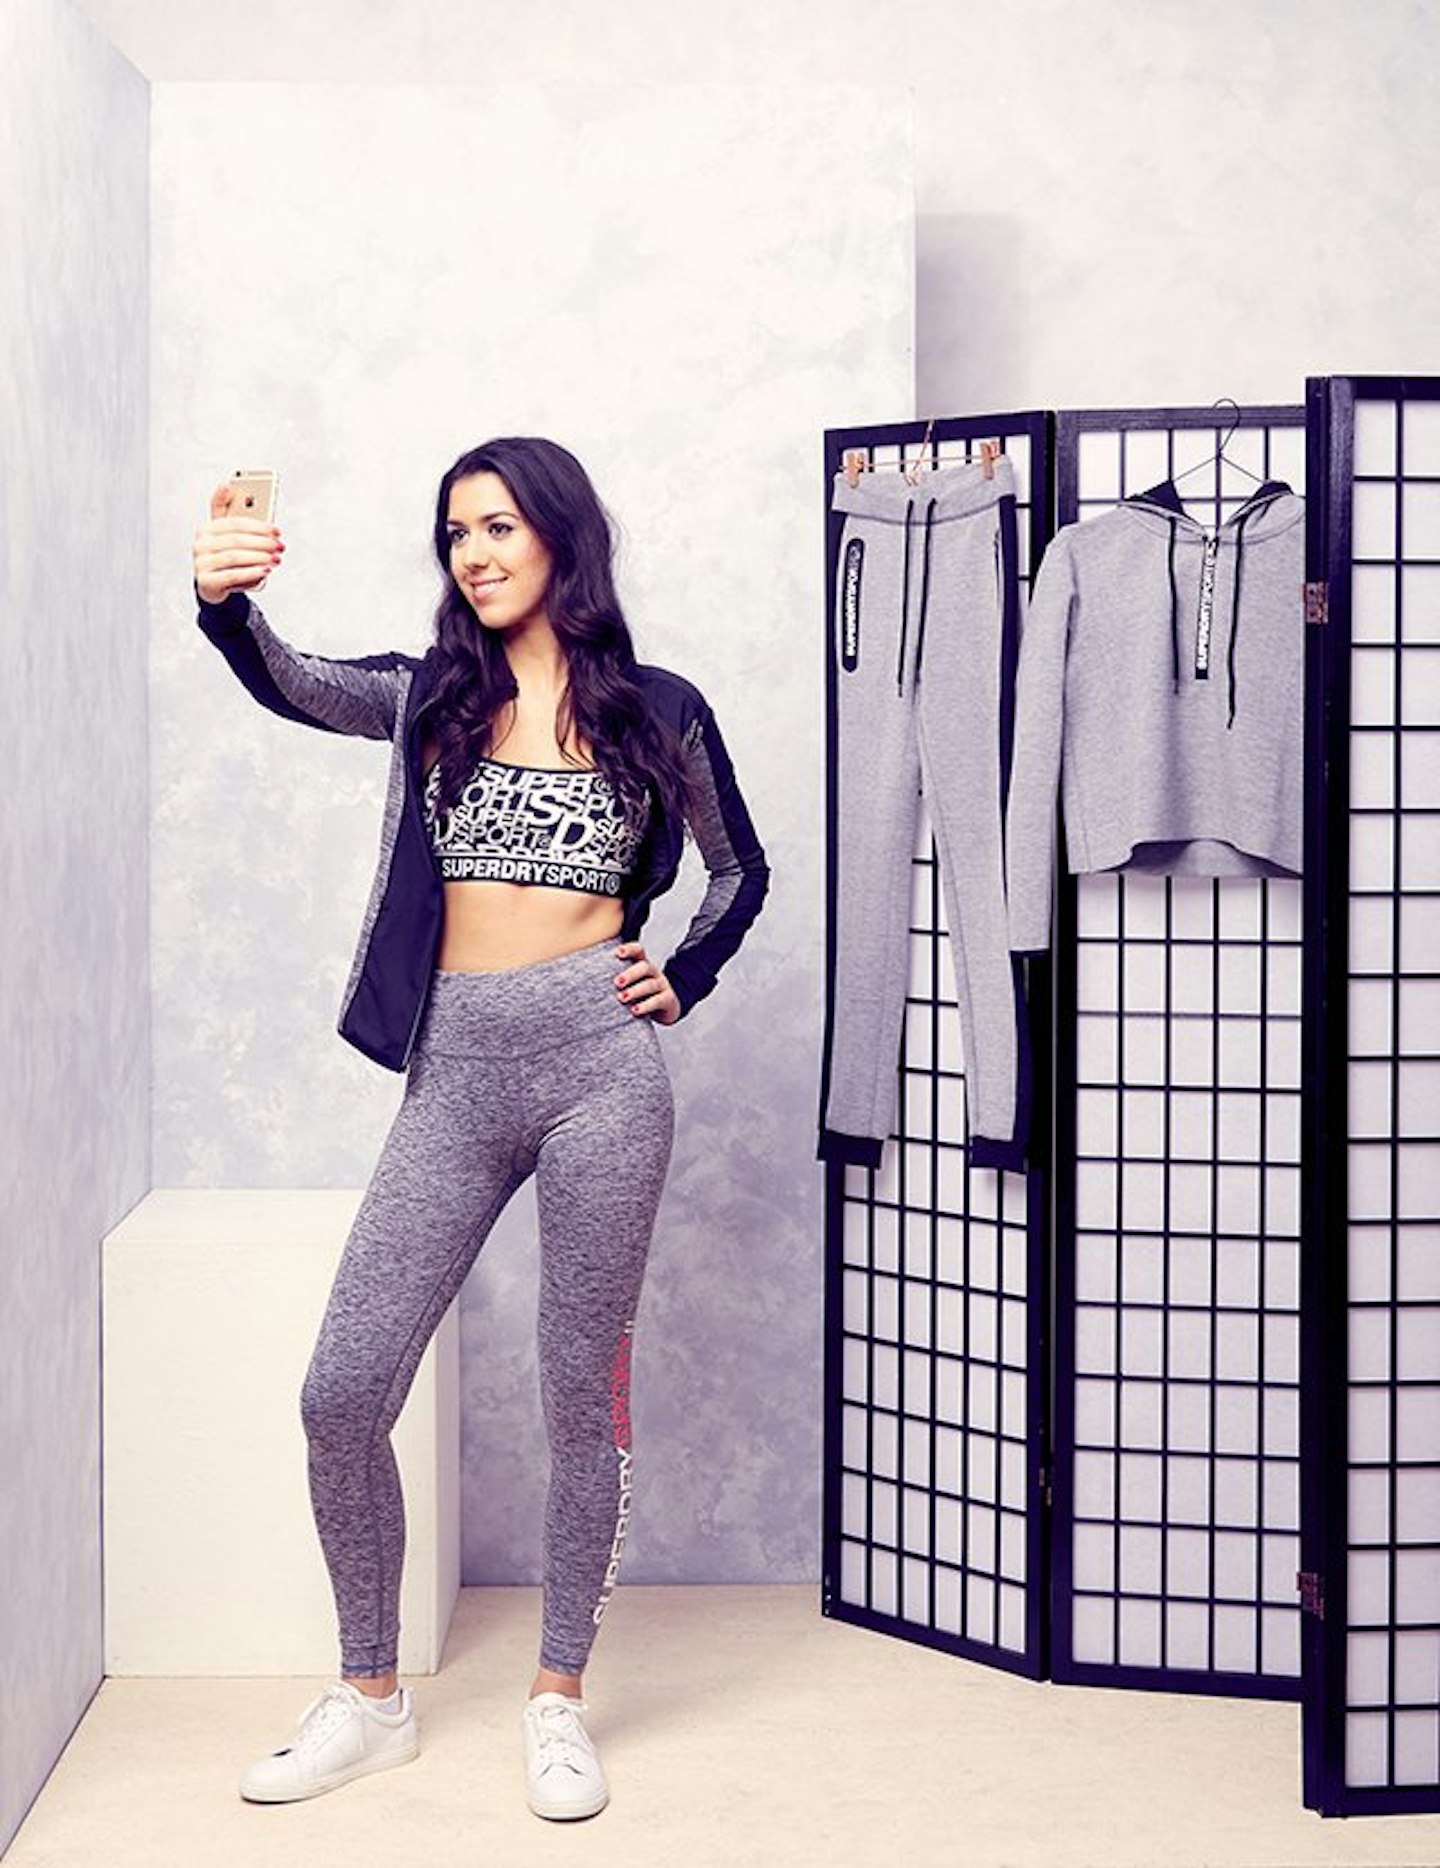 We Tried On All Of The Gym Wear From Superdry So That You Don't